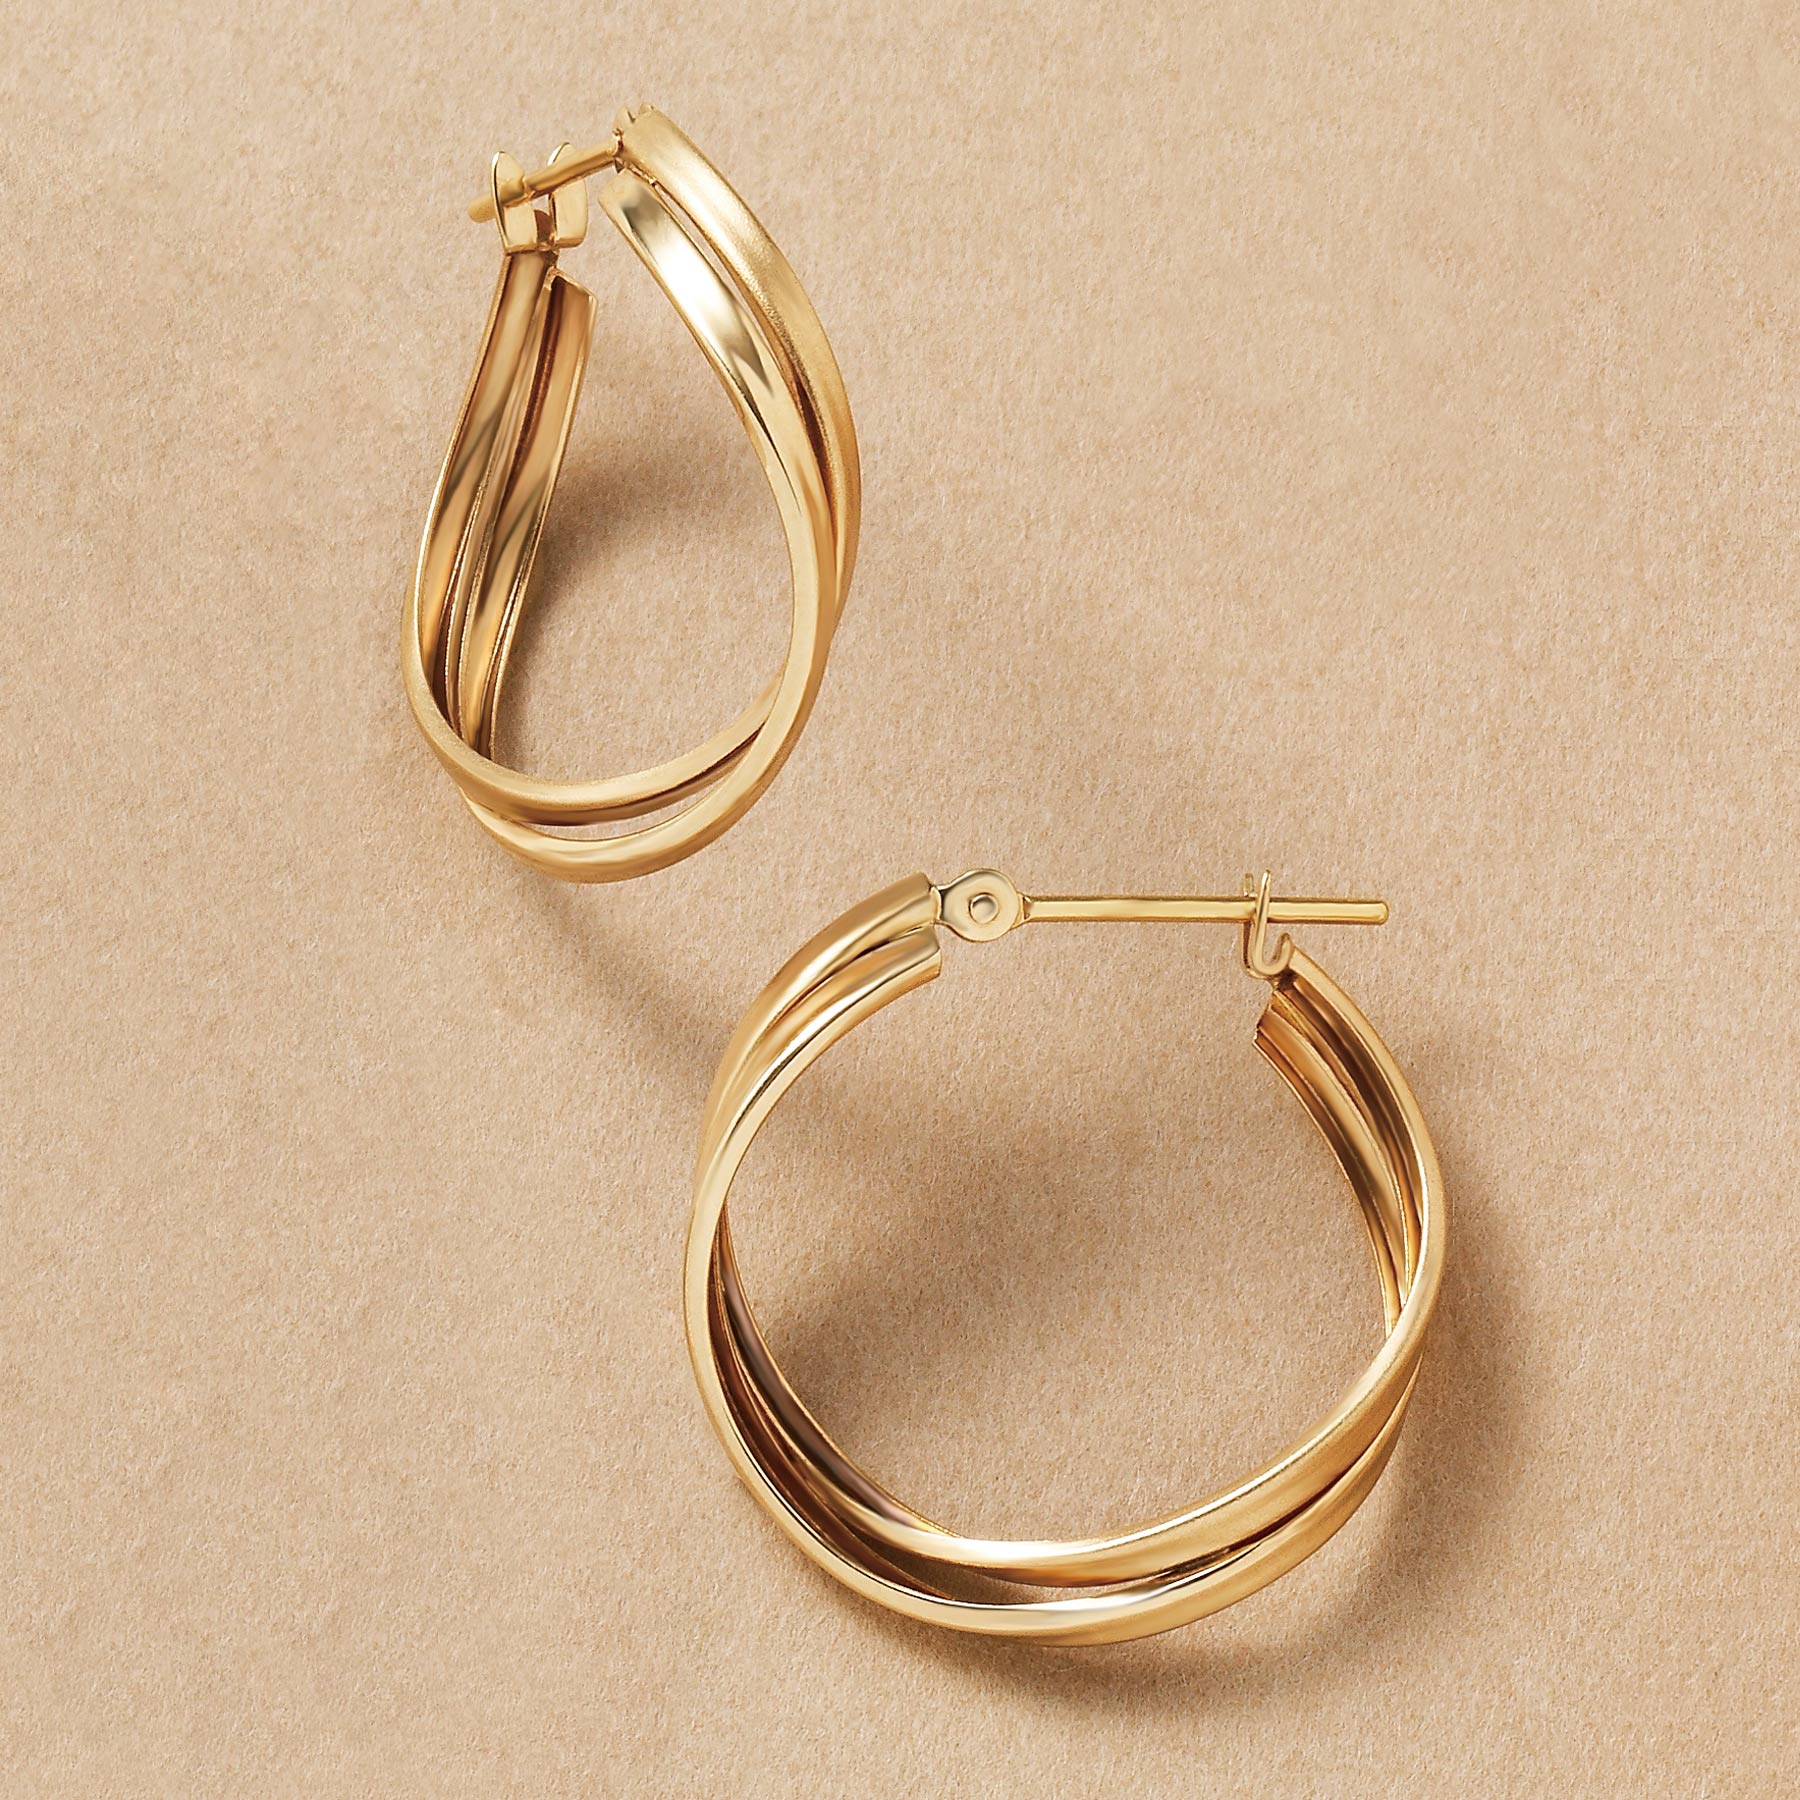 18K/10K Yellow Gold Twisted Twin Hoop Earrings (Large) - Product Image